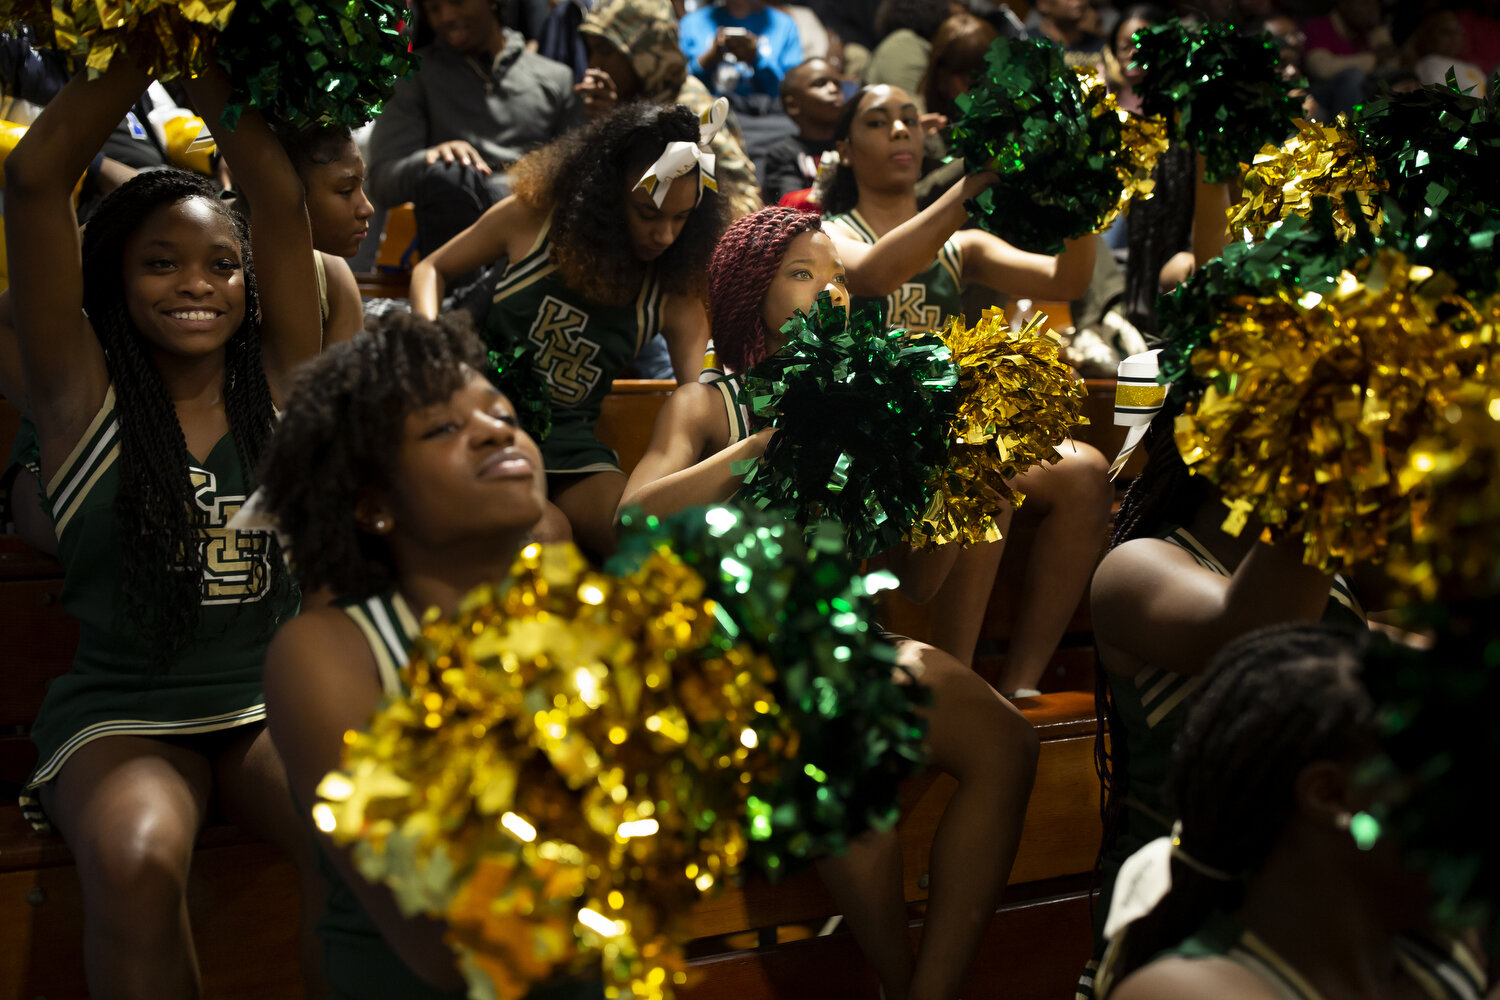  Kinston High School cheerleaders support the girl's team during a game against South Lenoir High School. The cheerleaders travel with the girl's basketball team to away games as well cheering for them at home. 